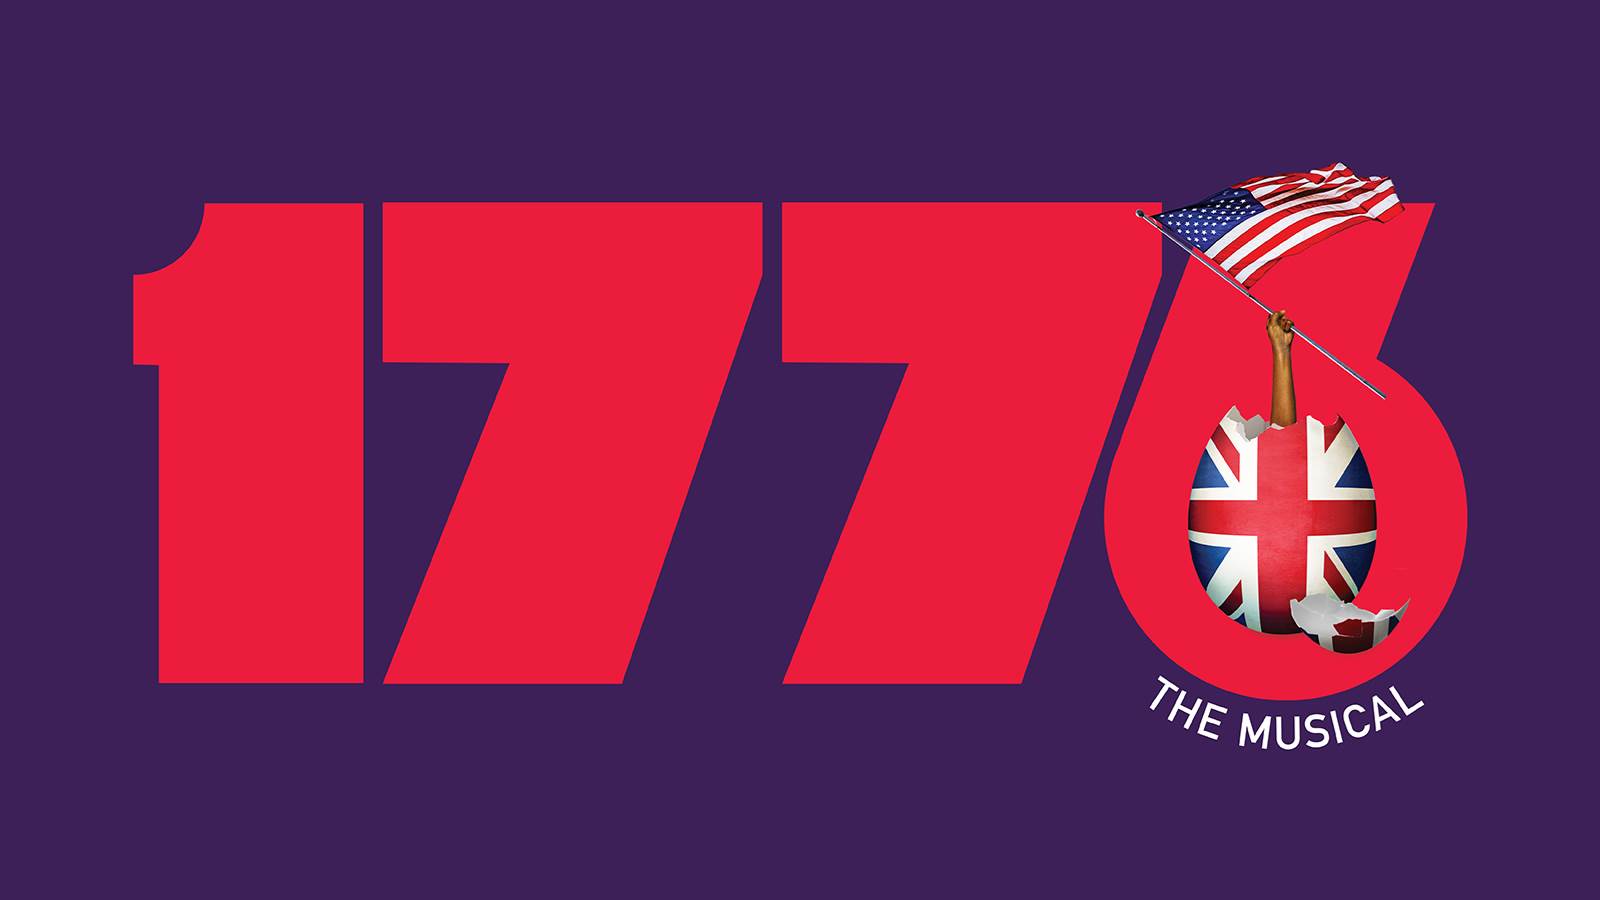 Title treatment for 1776 shows an egg-shaped British flag hatching an American flag held by an arm.